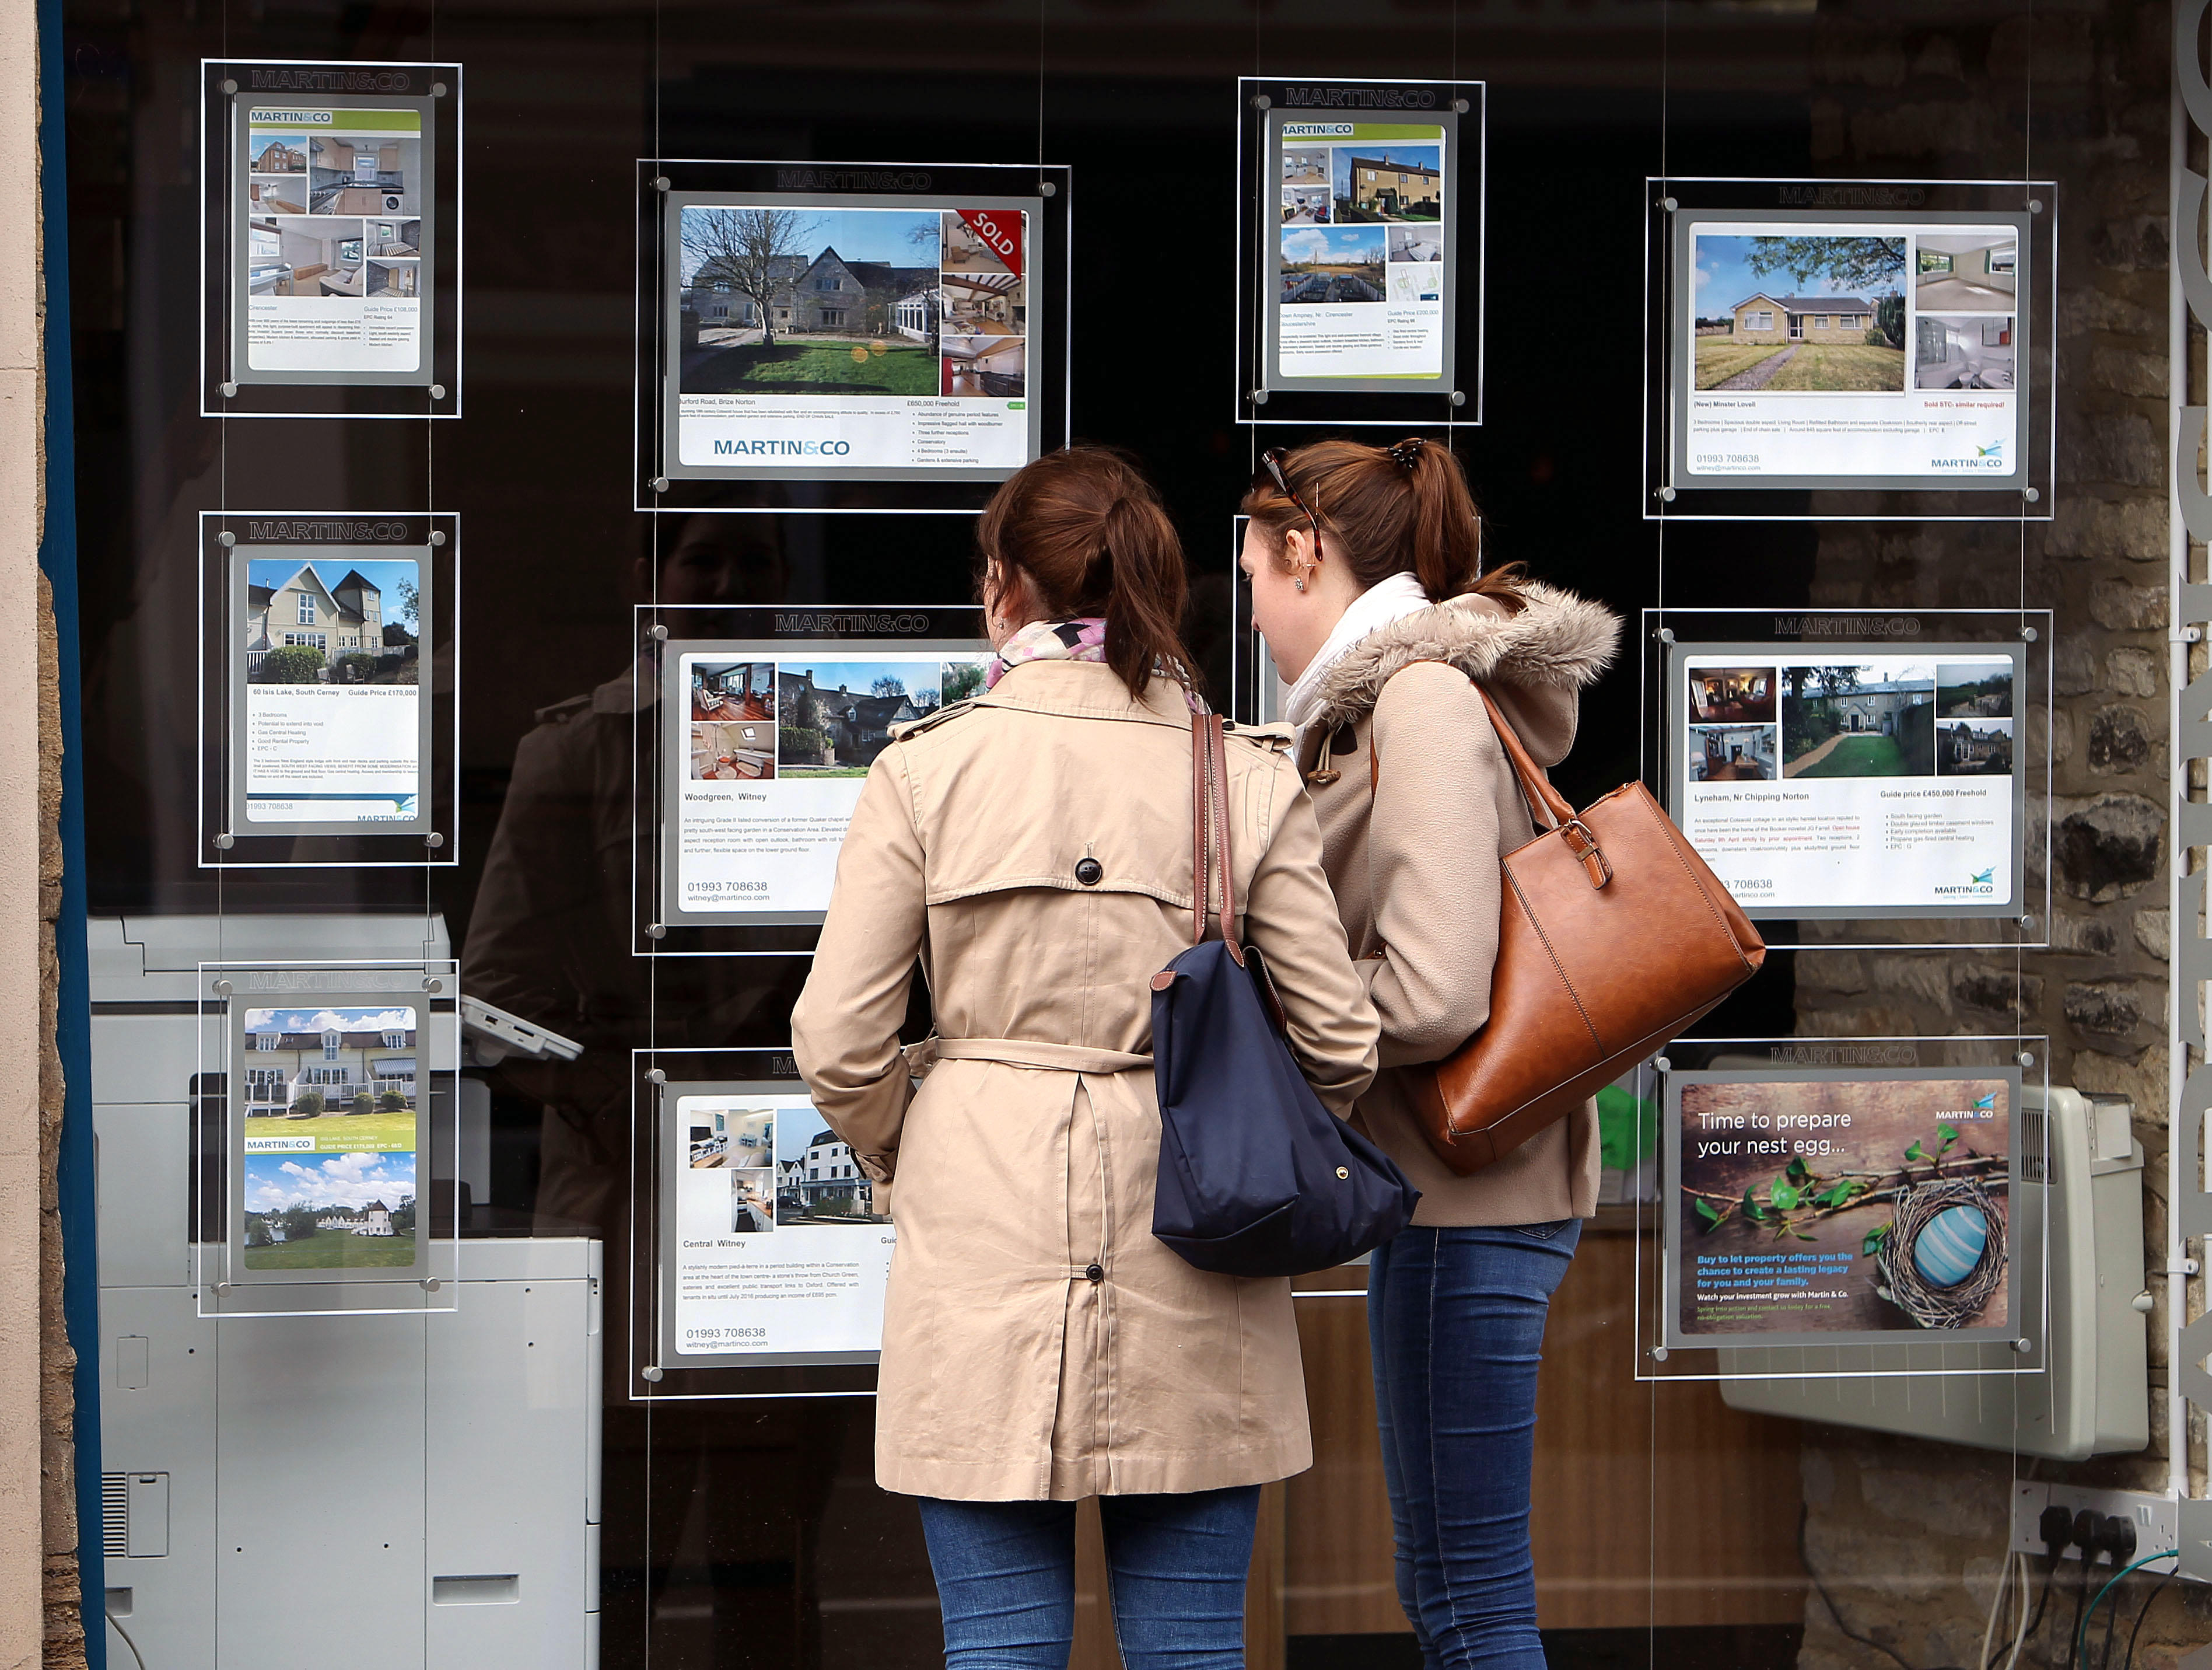 House prices have fallen at their fastest rate for 12 years as soaring mortgage rates hit buyer demand